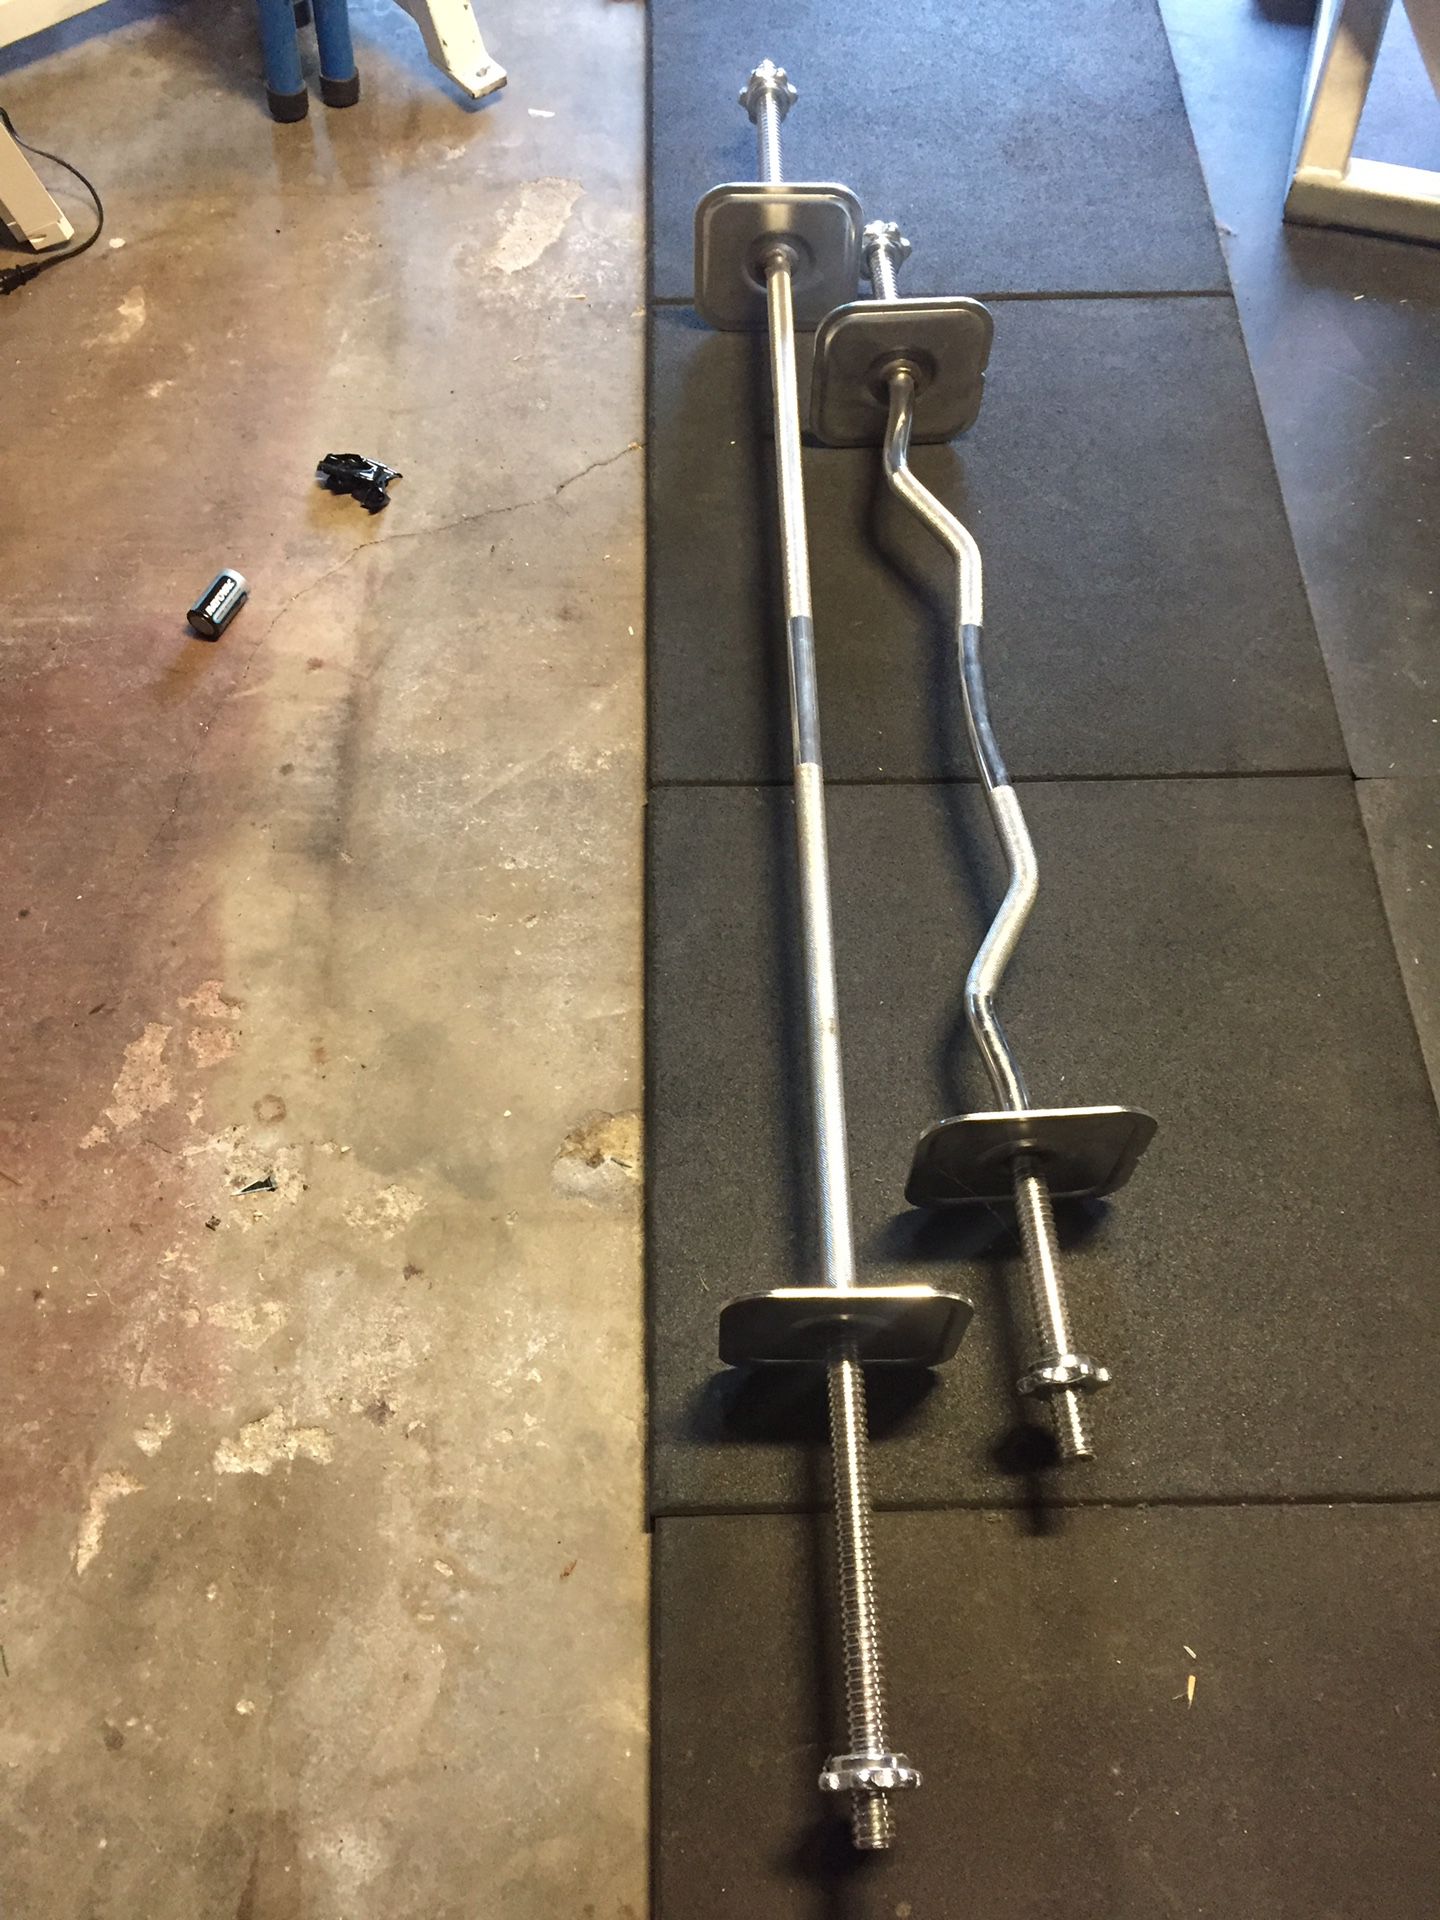 Ironmaster straight and curl bar